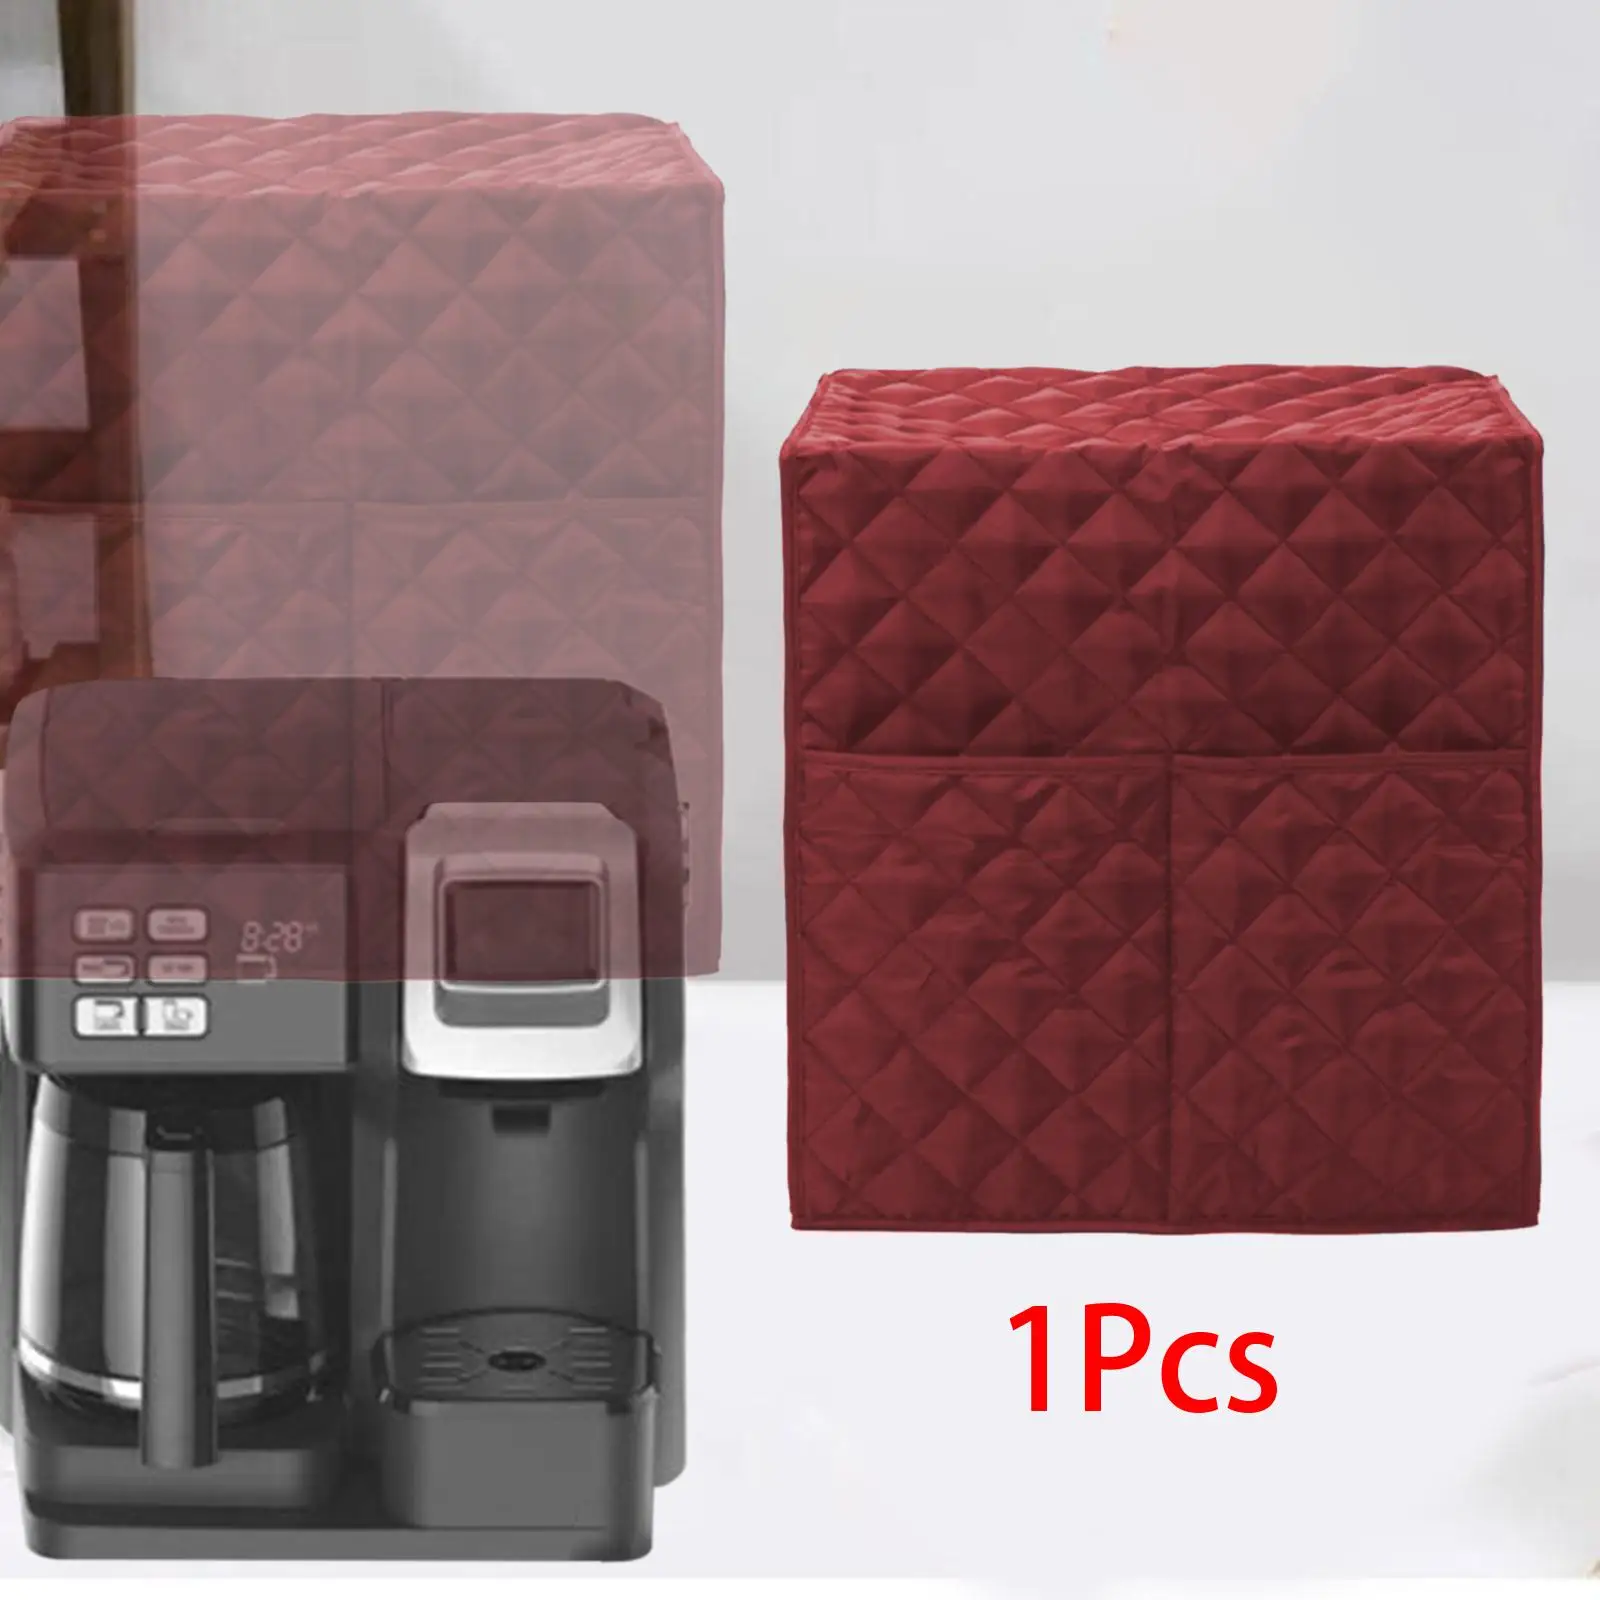 Espresso Machine Quilted Protective Cover Machine Washable Mixer Accessories Coffee Making Machine Cover for Restaurant Bar Cafe